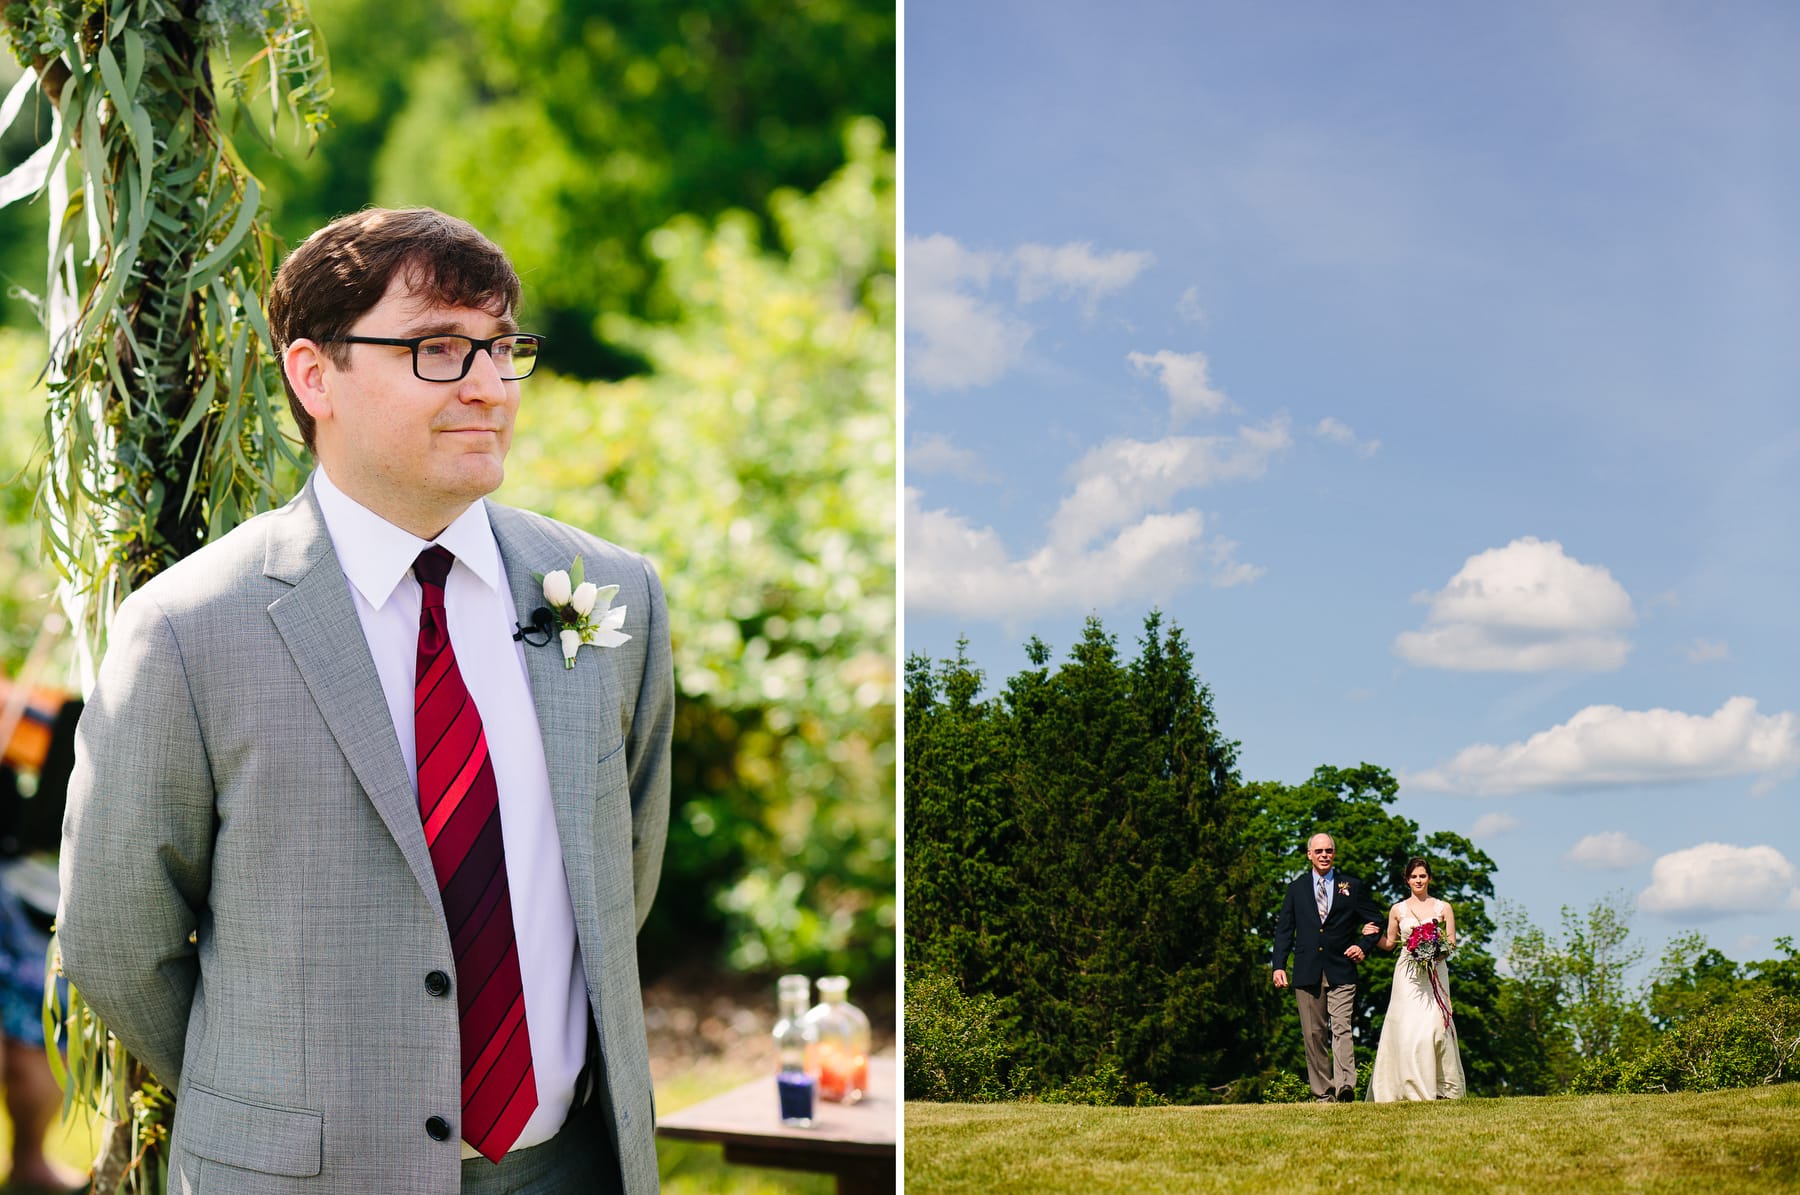 Red Apple Farm wedding ceremony in orchard